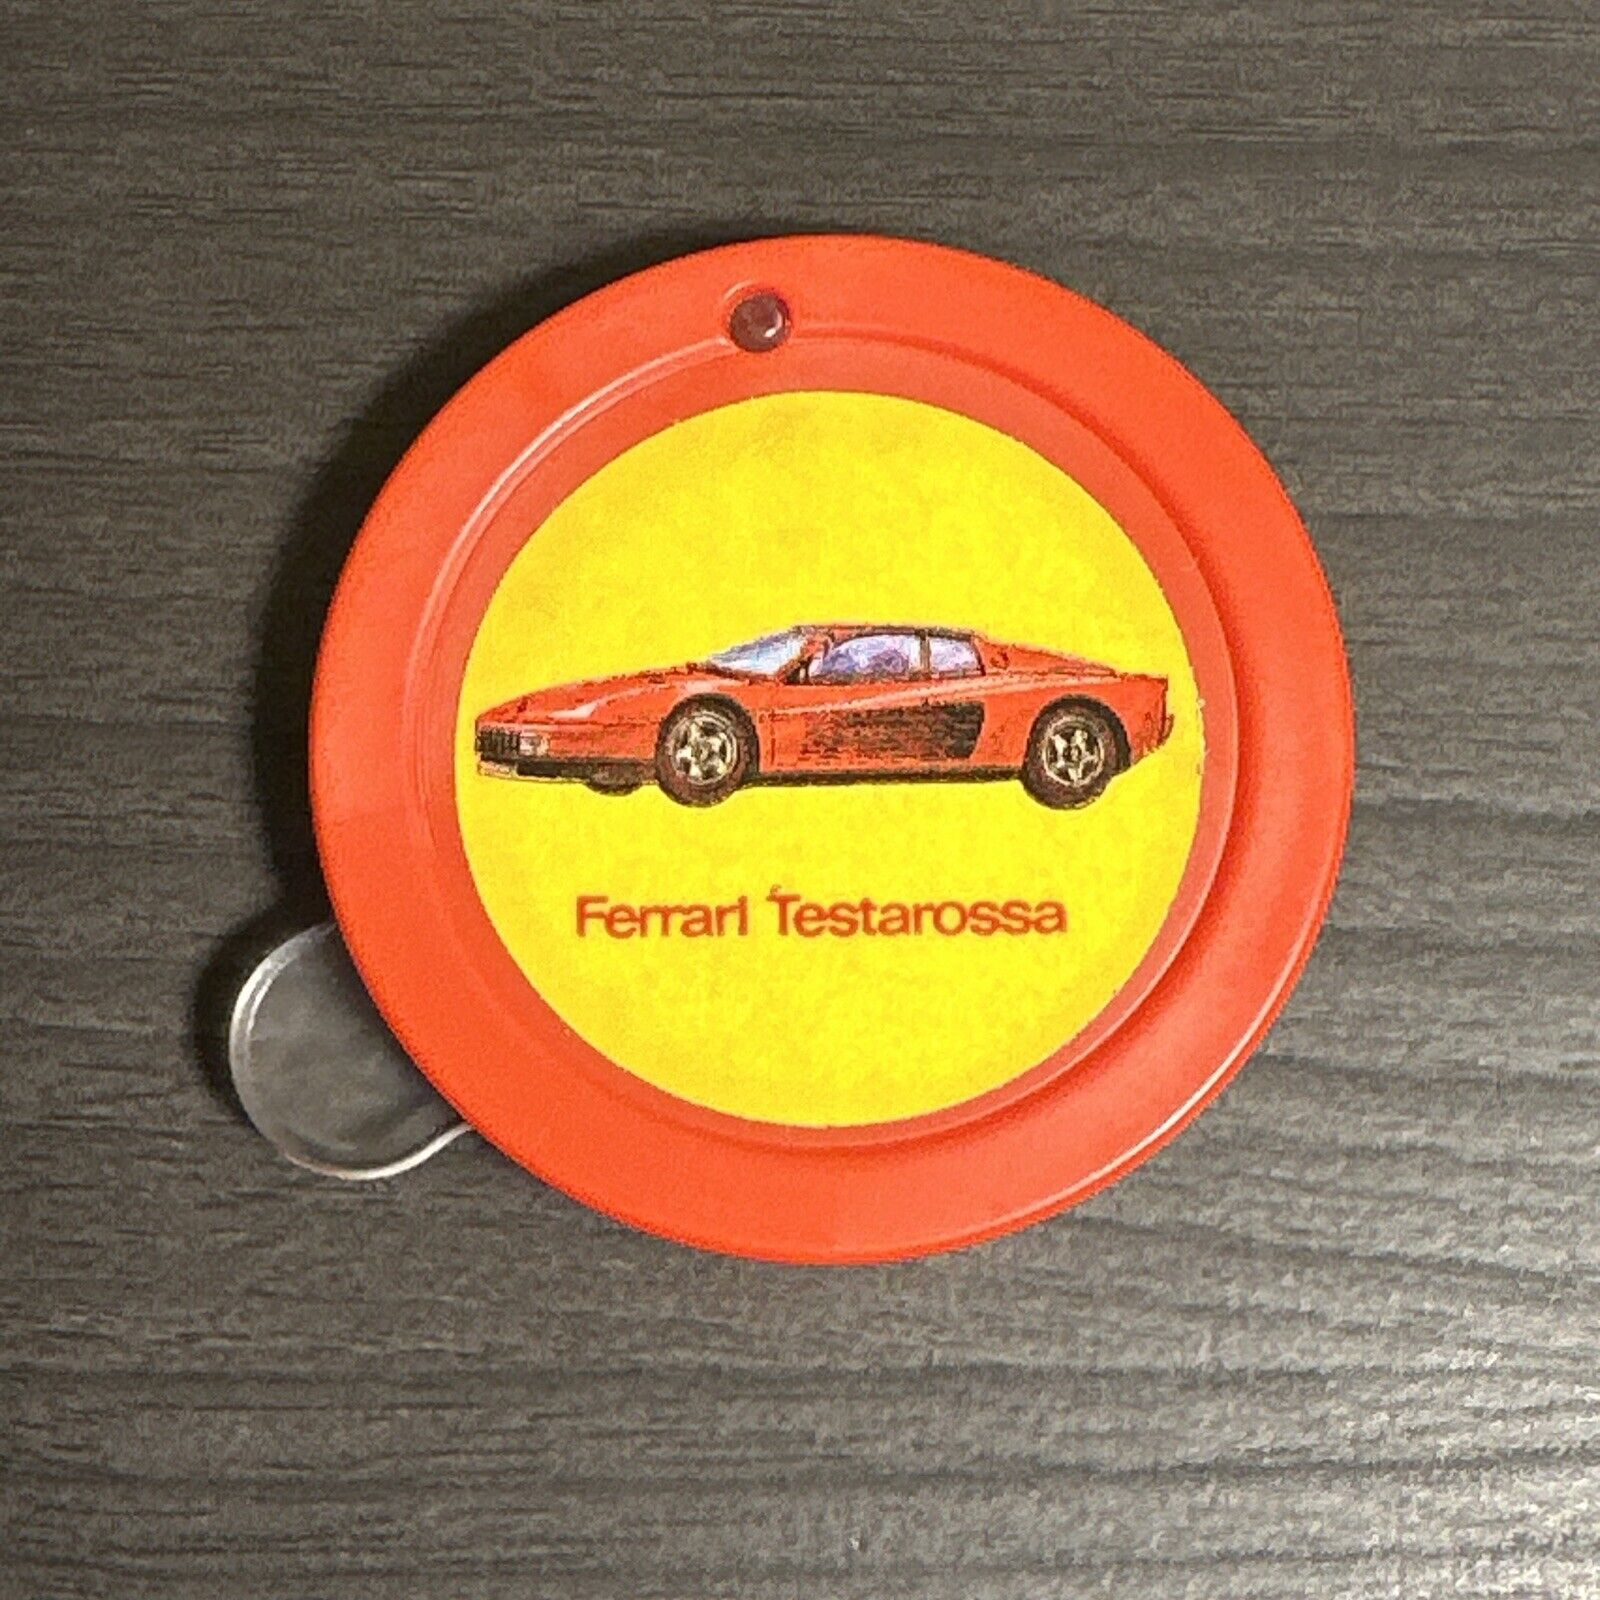 Vintage Ferarri Testarossa Magnifying Glass - Made in West Germany